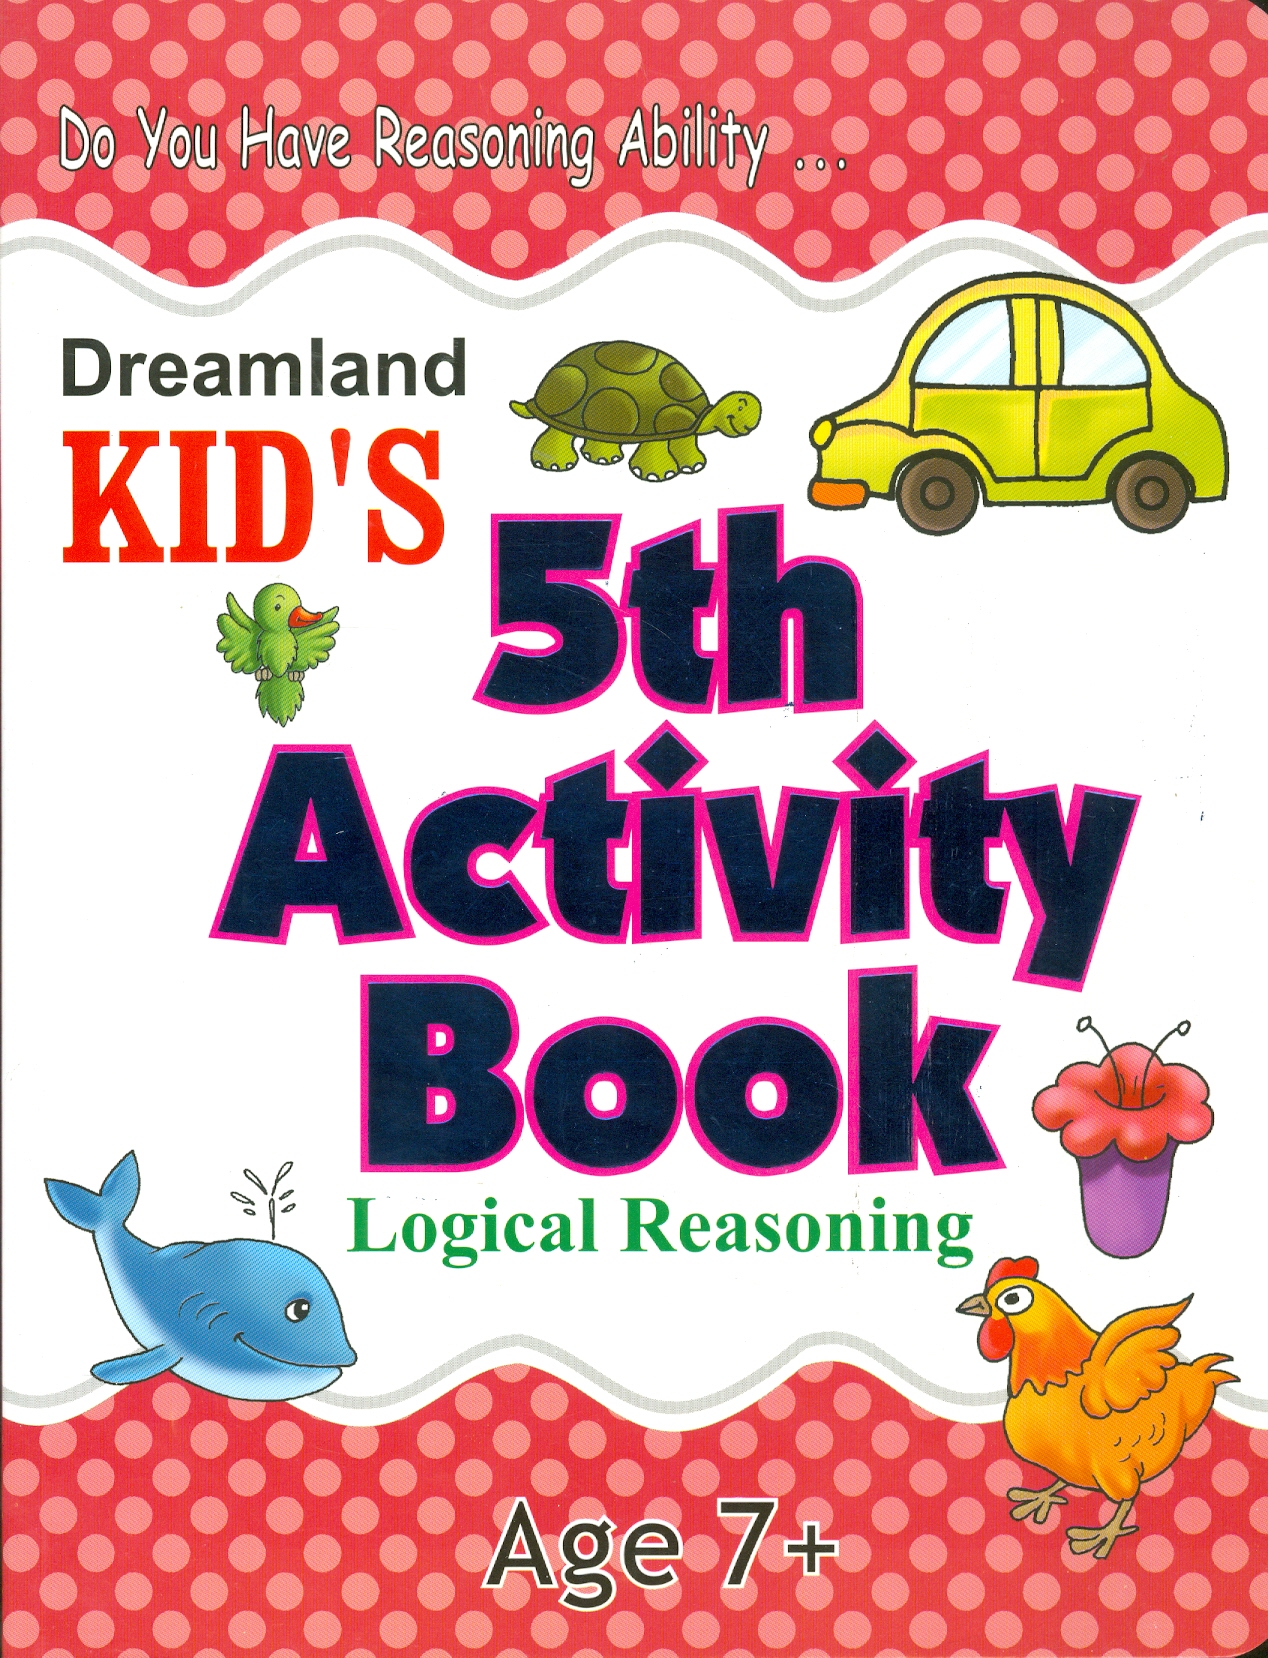 Kid's 5th Activity Book Logic Reasoning - Do You Have Reasoning Ability - Age 7+ (Các Hoạt Động Suy Luận Logic 7+)